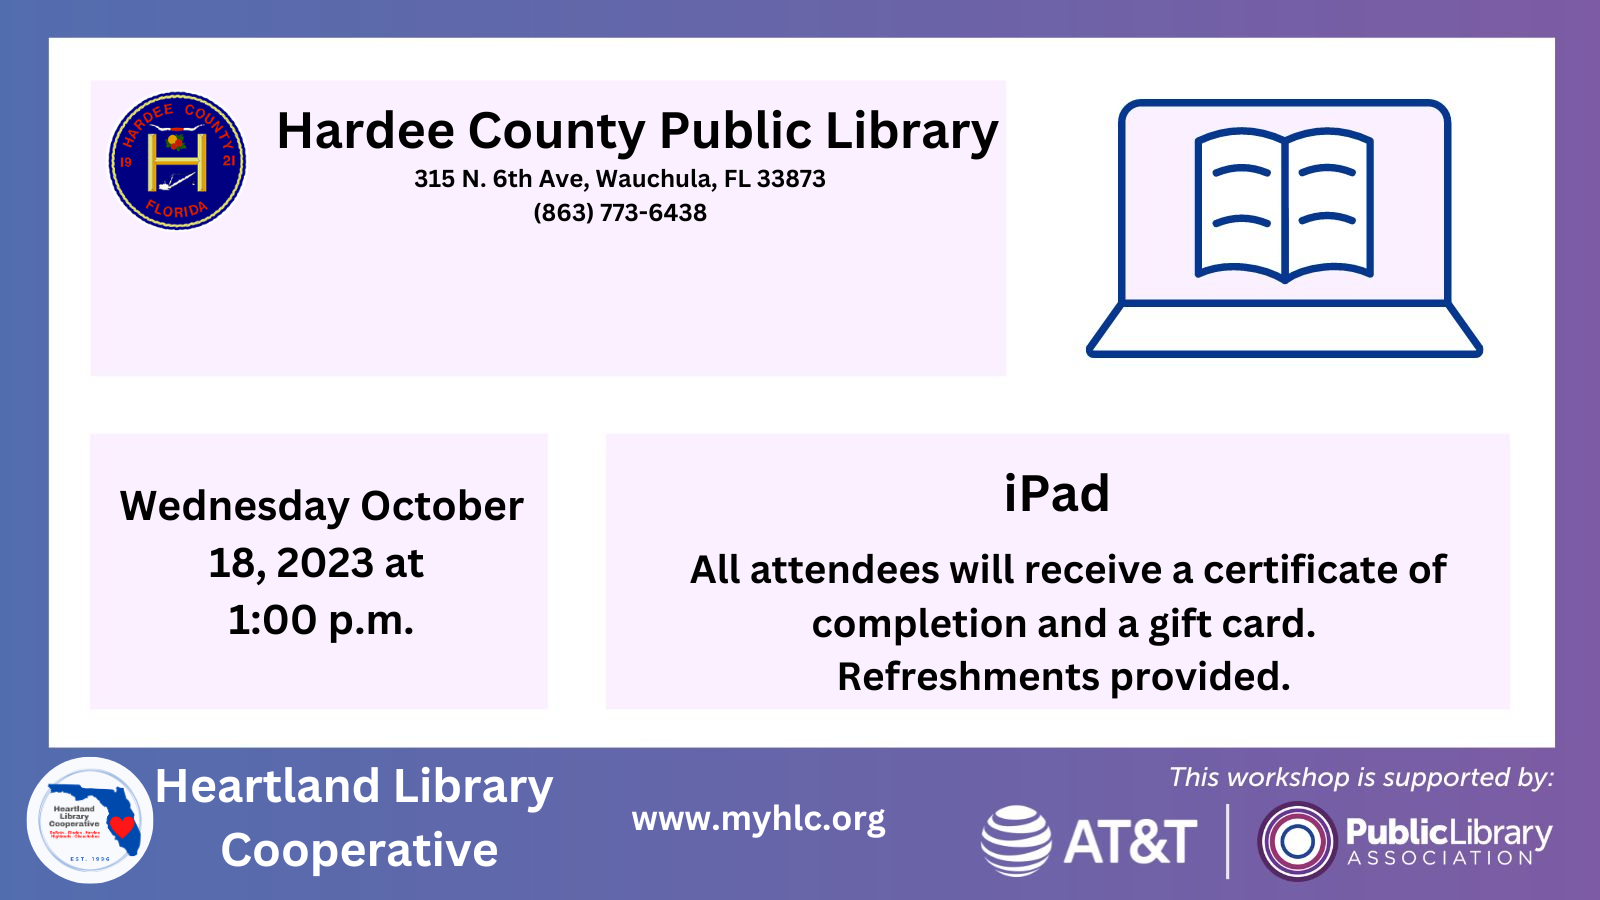 On Wednesday, October 18, 2023 at 1 p.m., the Hardee County Public Library will host an iPad basics course.